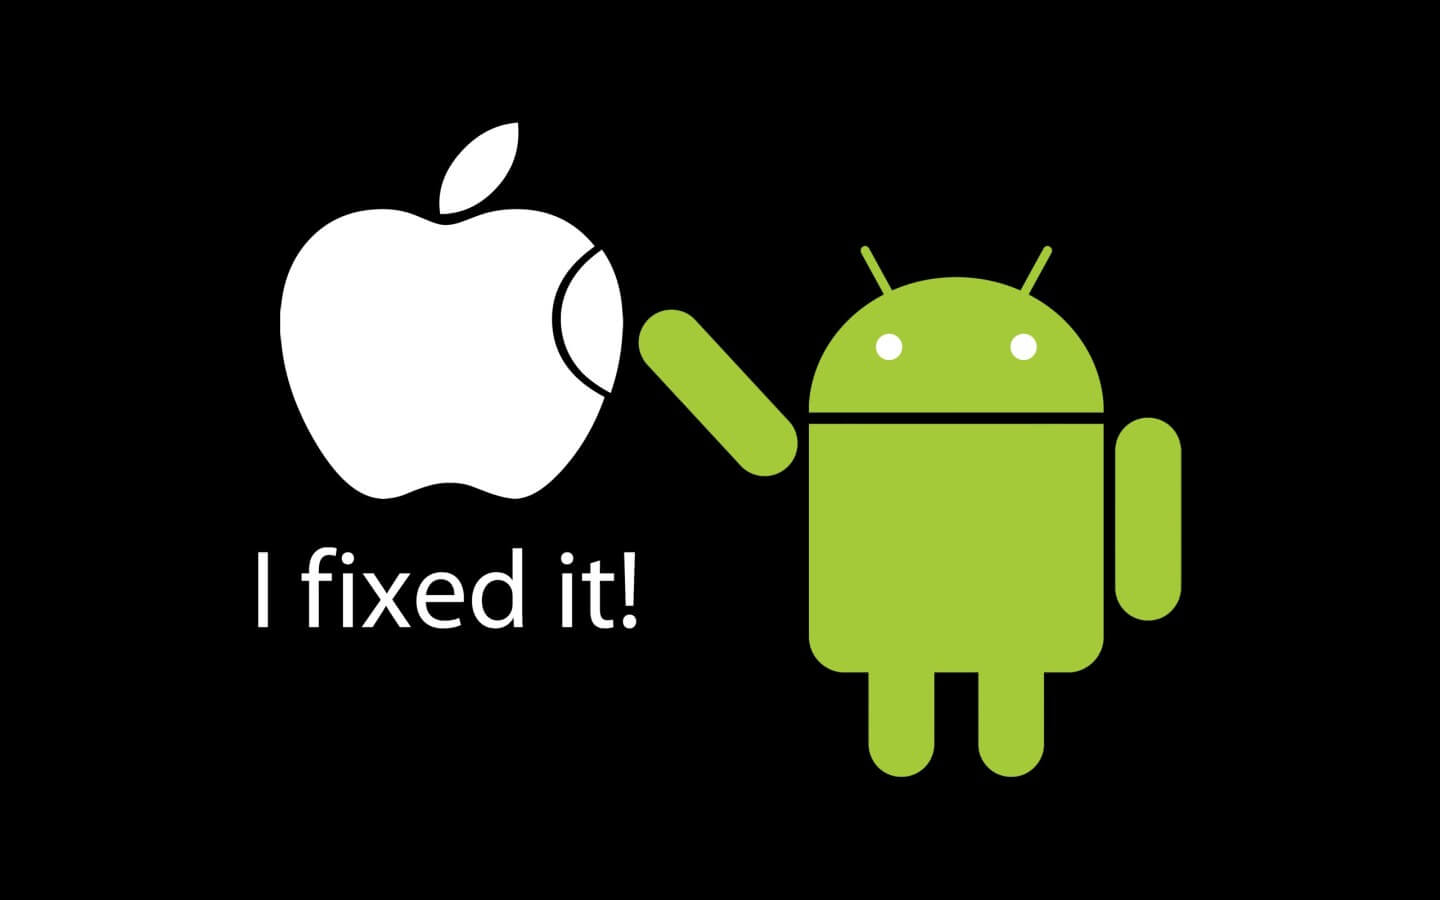 Funny-Apple-and-Android-1440x900-wide-wallpapers.net